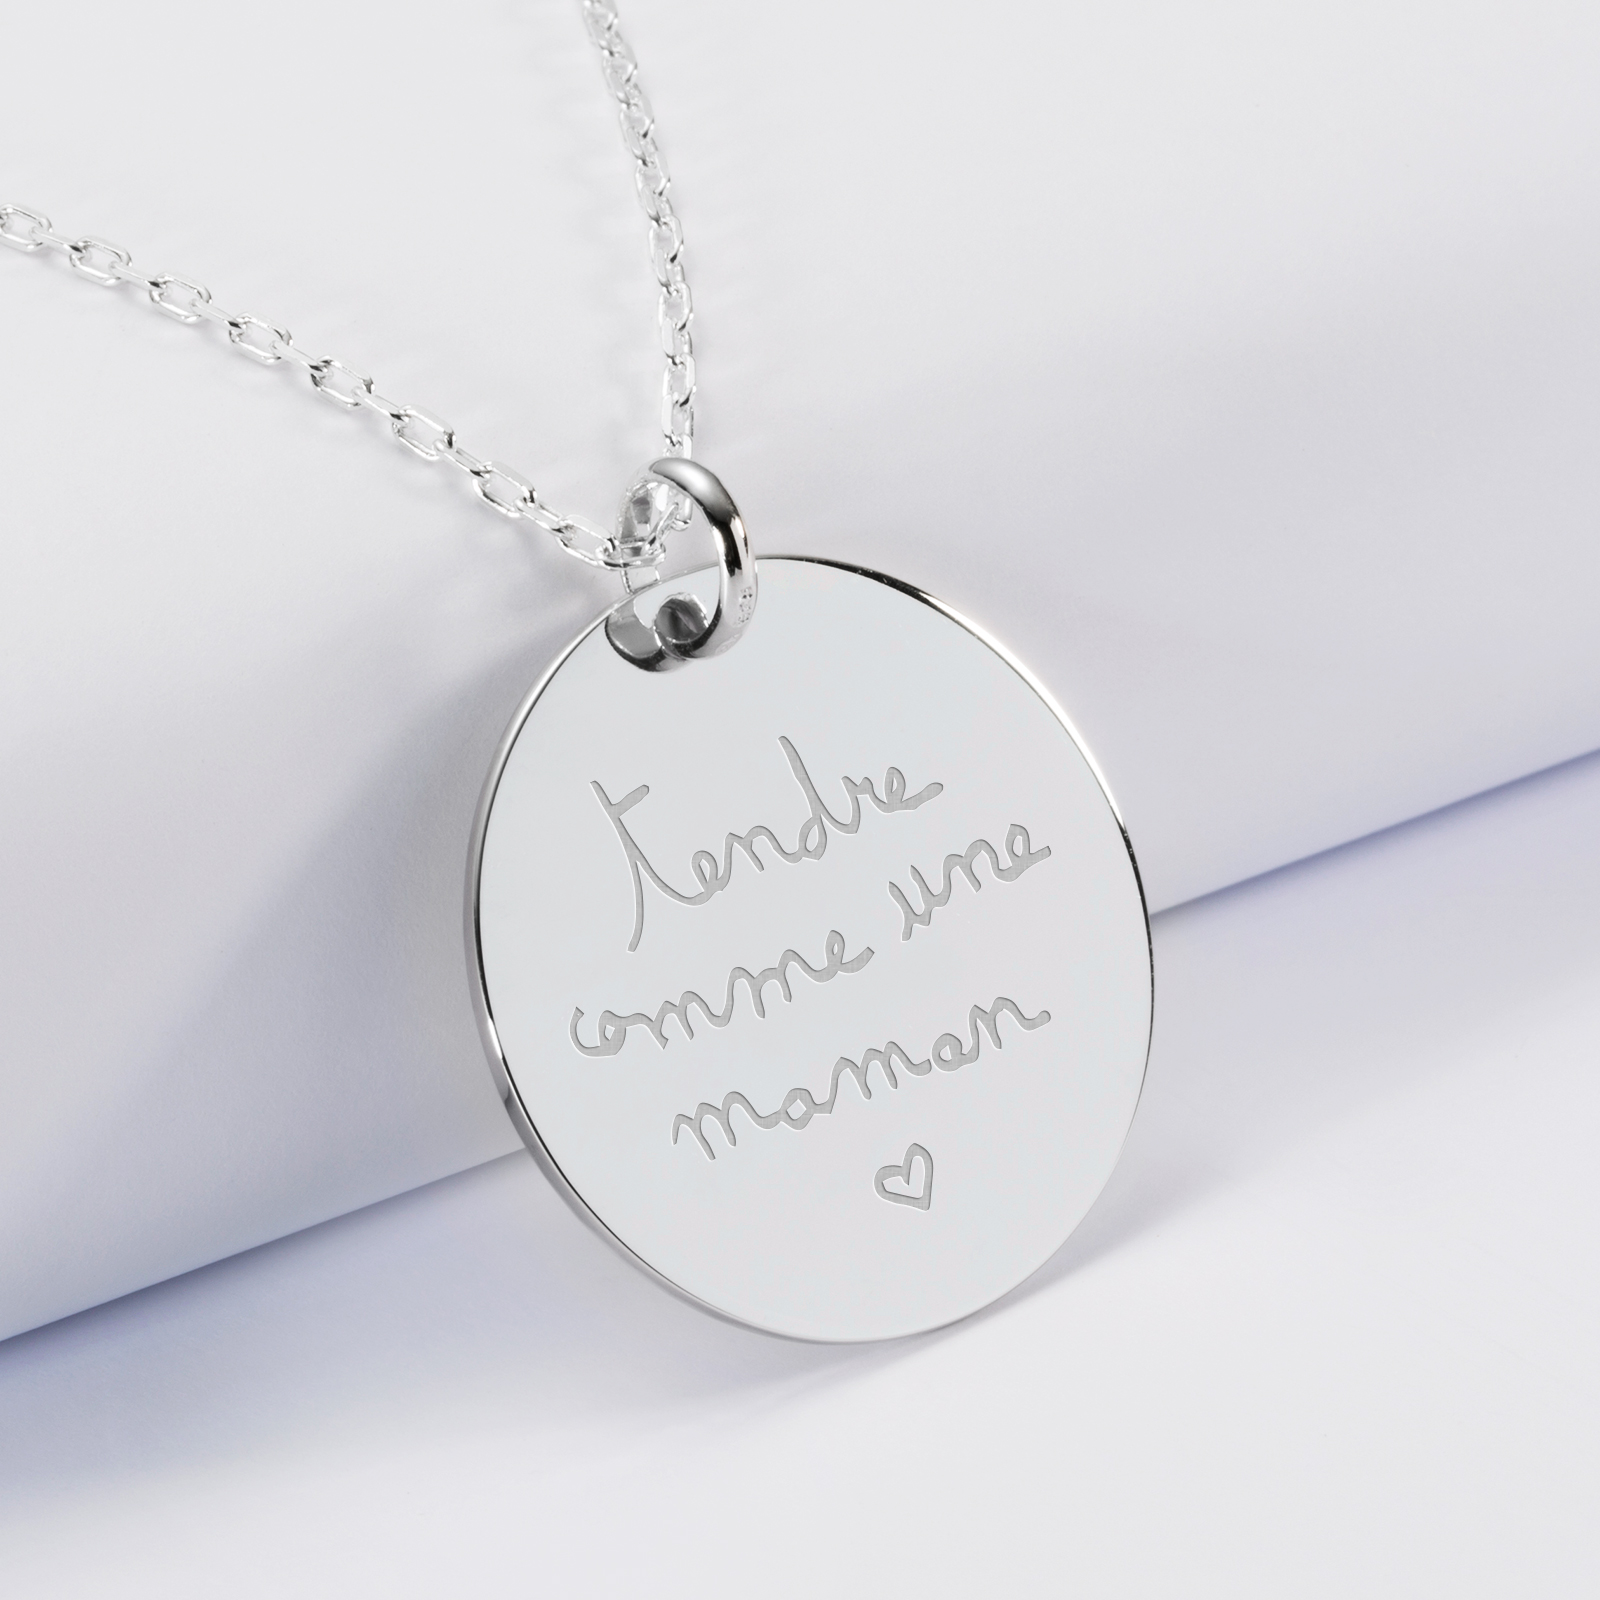 Personalised engraved silver medallion pendant 27 mm - writing